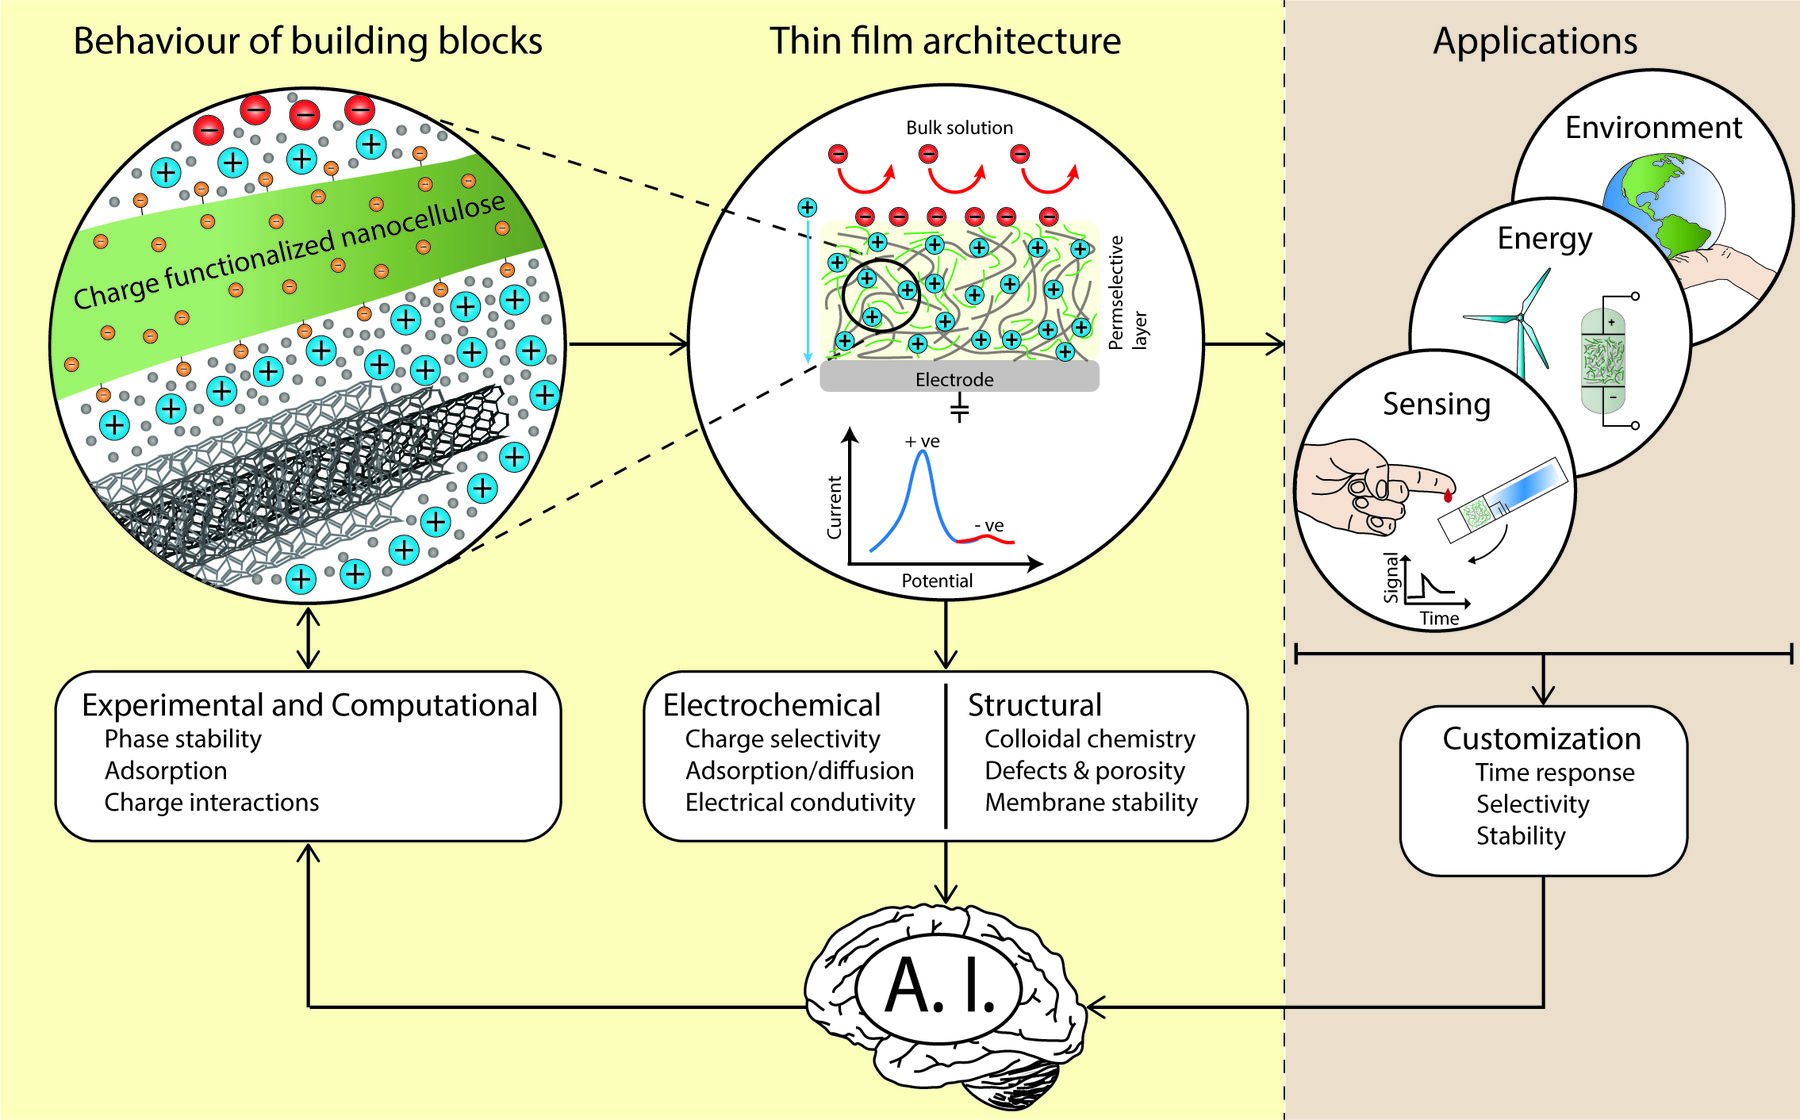 Lignocellulosic Architectures in electrochemistry